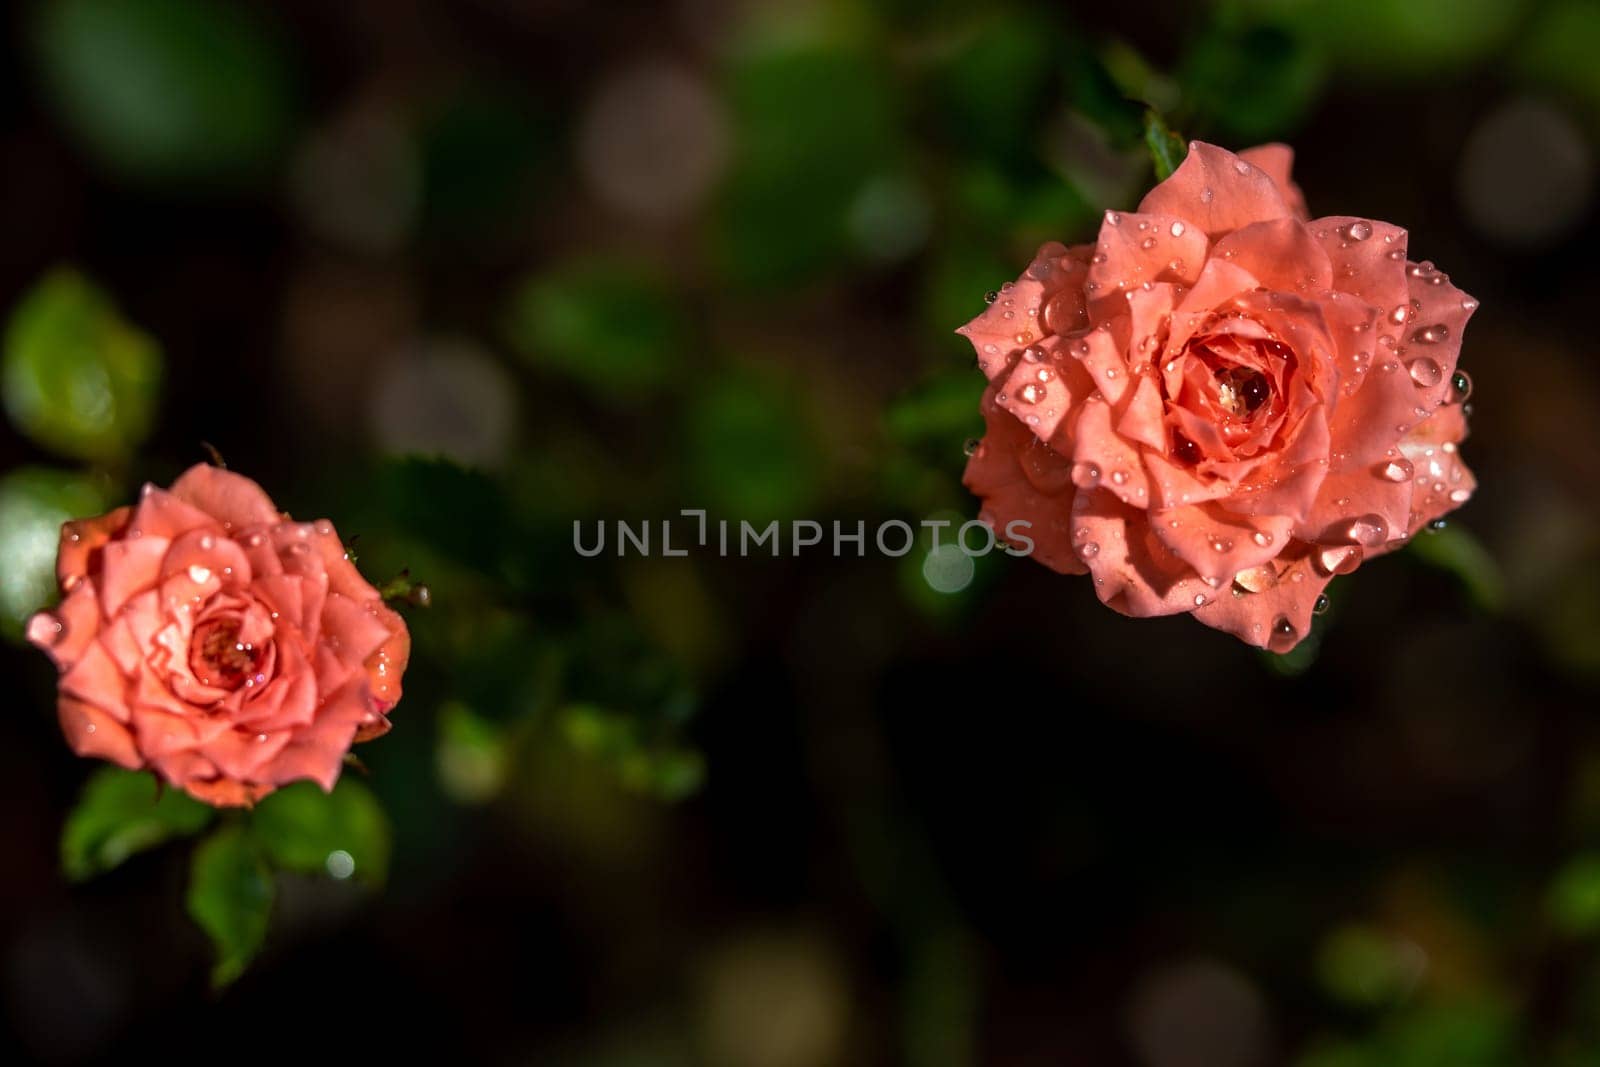 Shape and colors of miniature roses that bloom in the garden